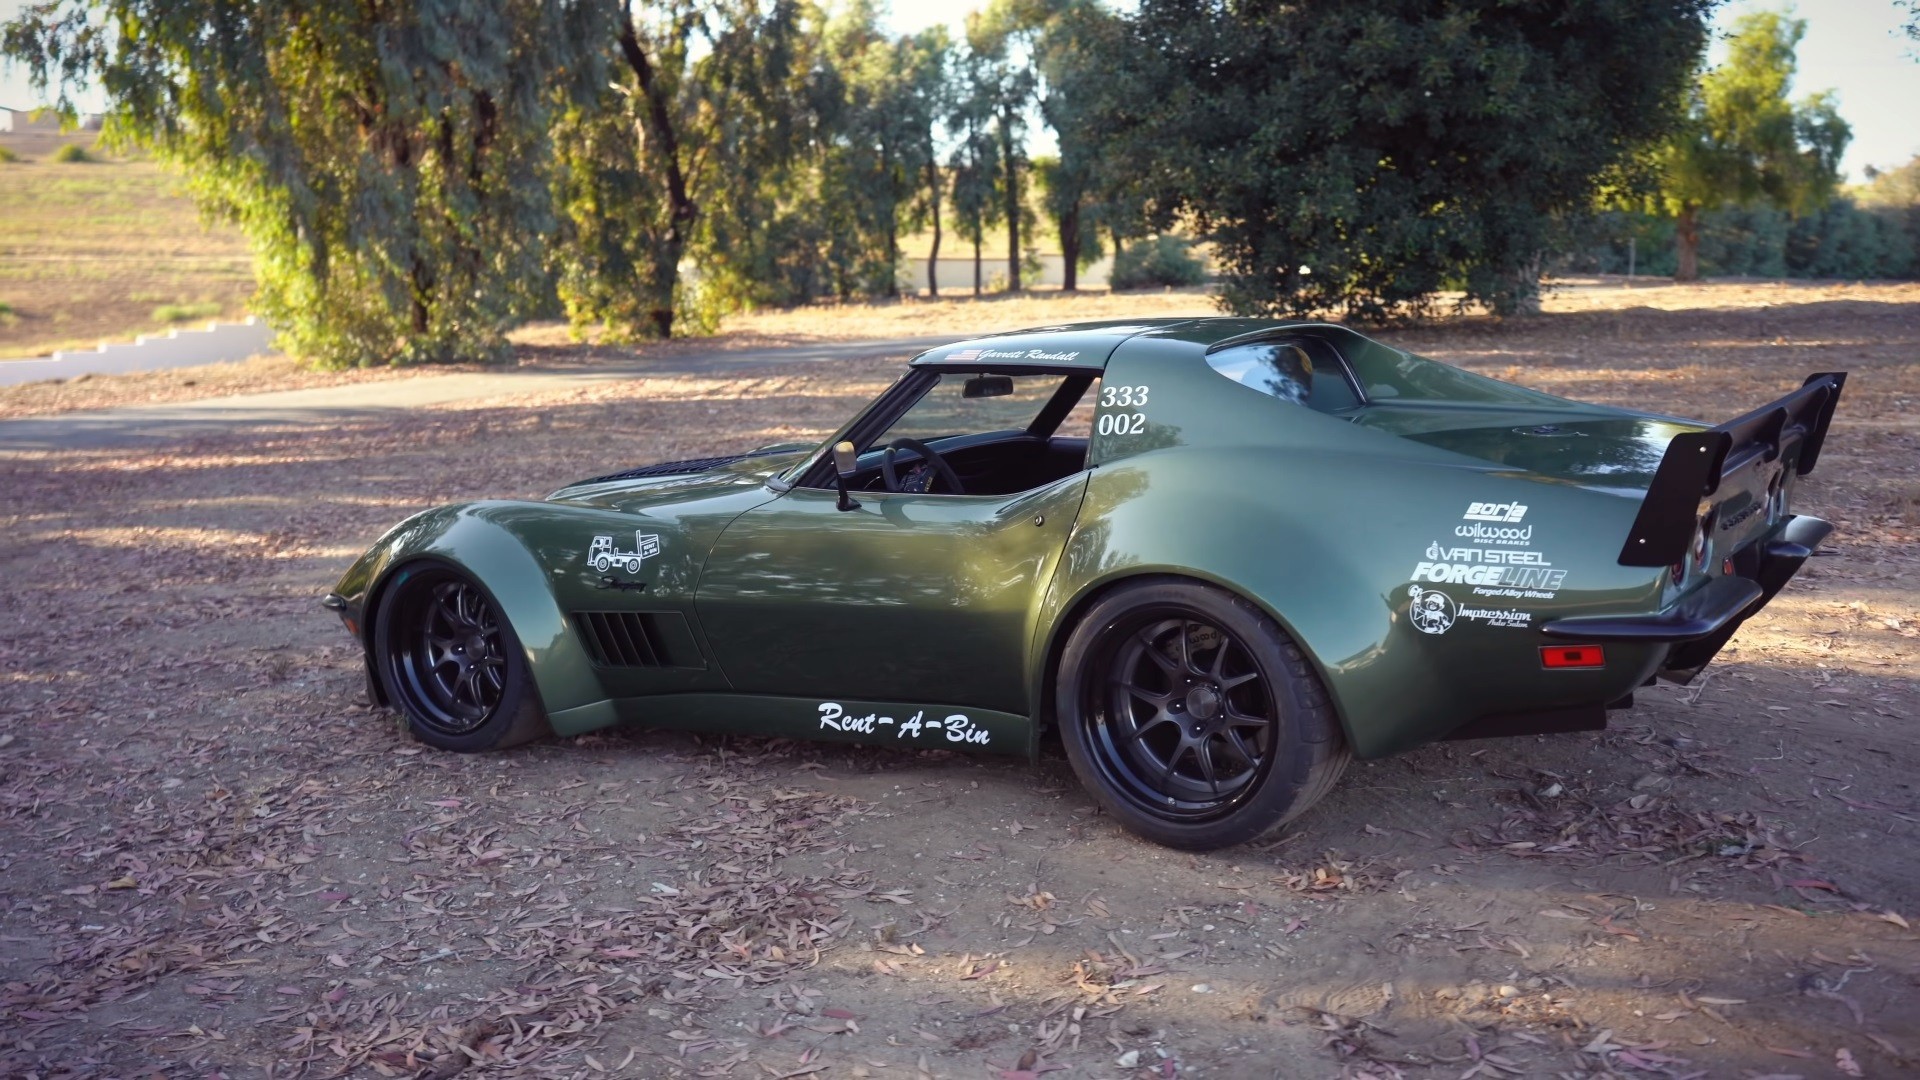 Widebody 1970 corvette c3 rambo isnt your typical pro touring build 6